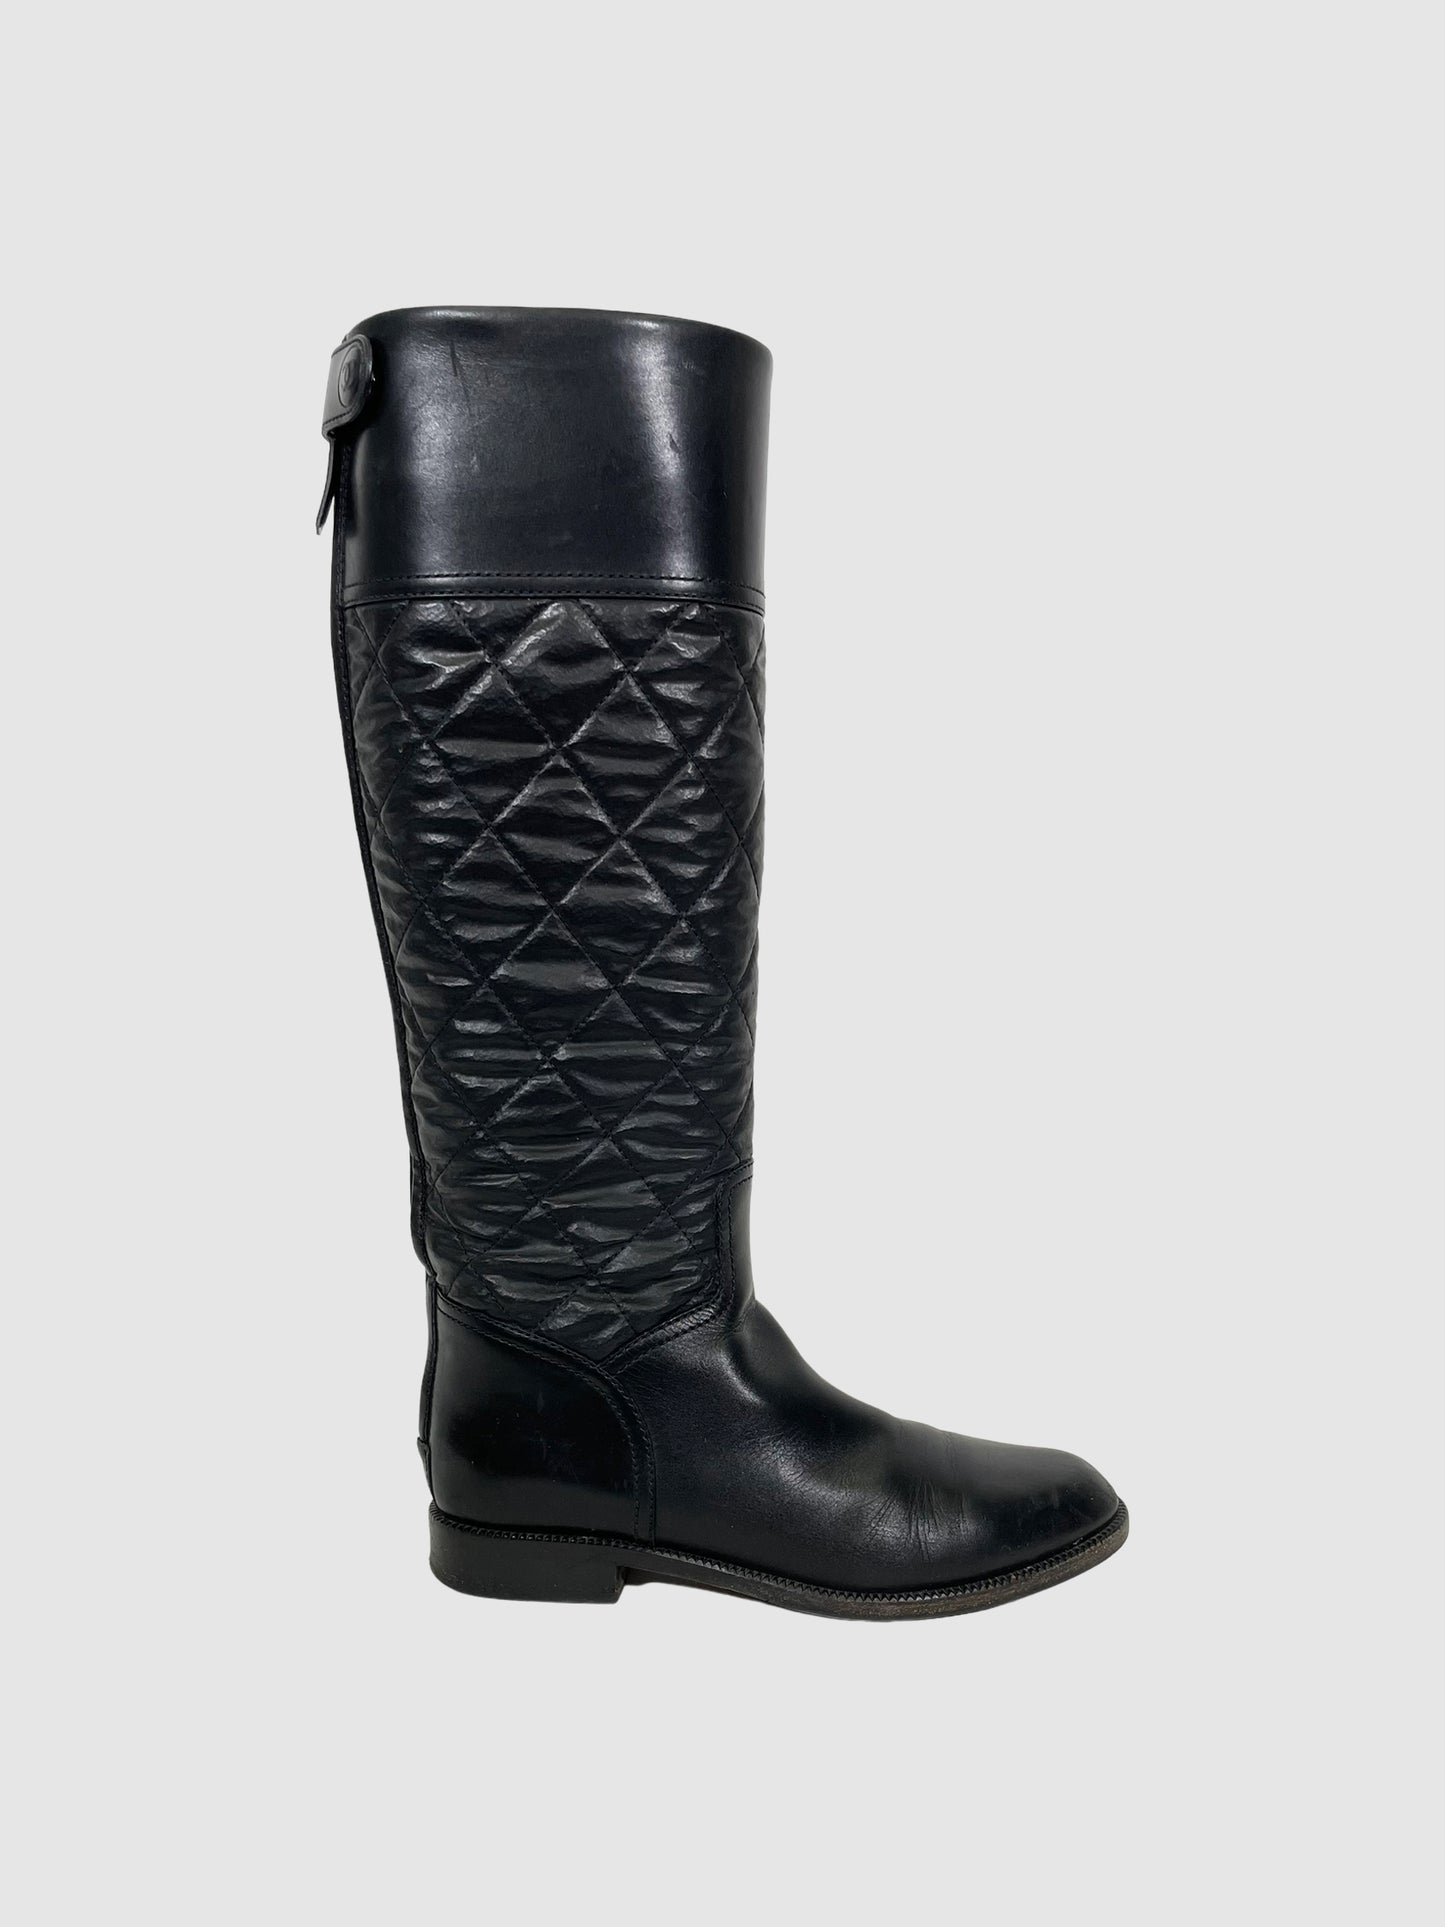 Chanel Tall Leather Riding Boots - Size 39